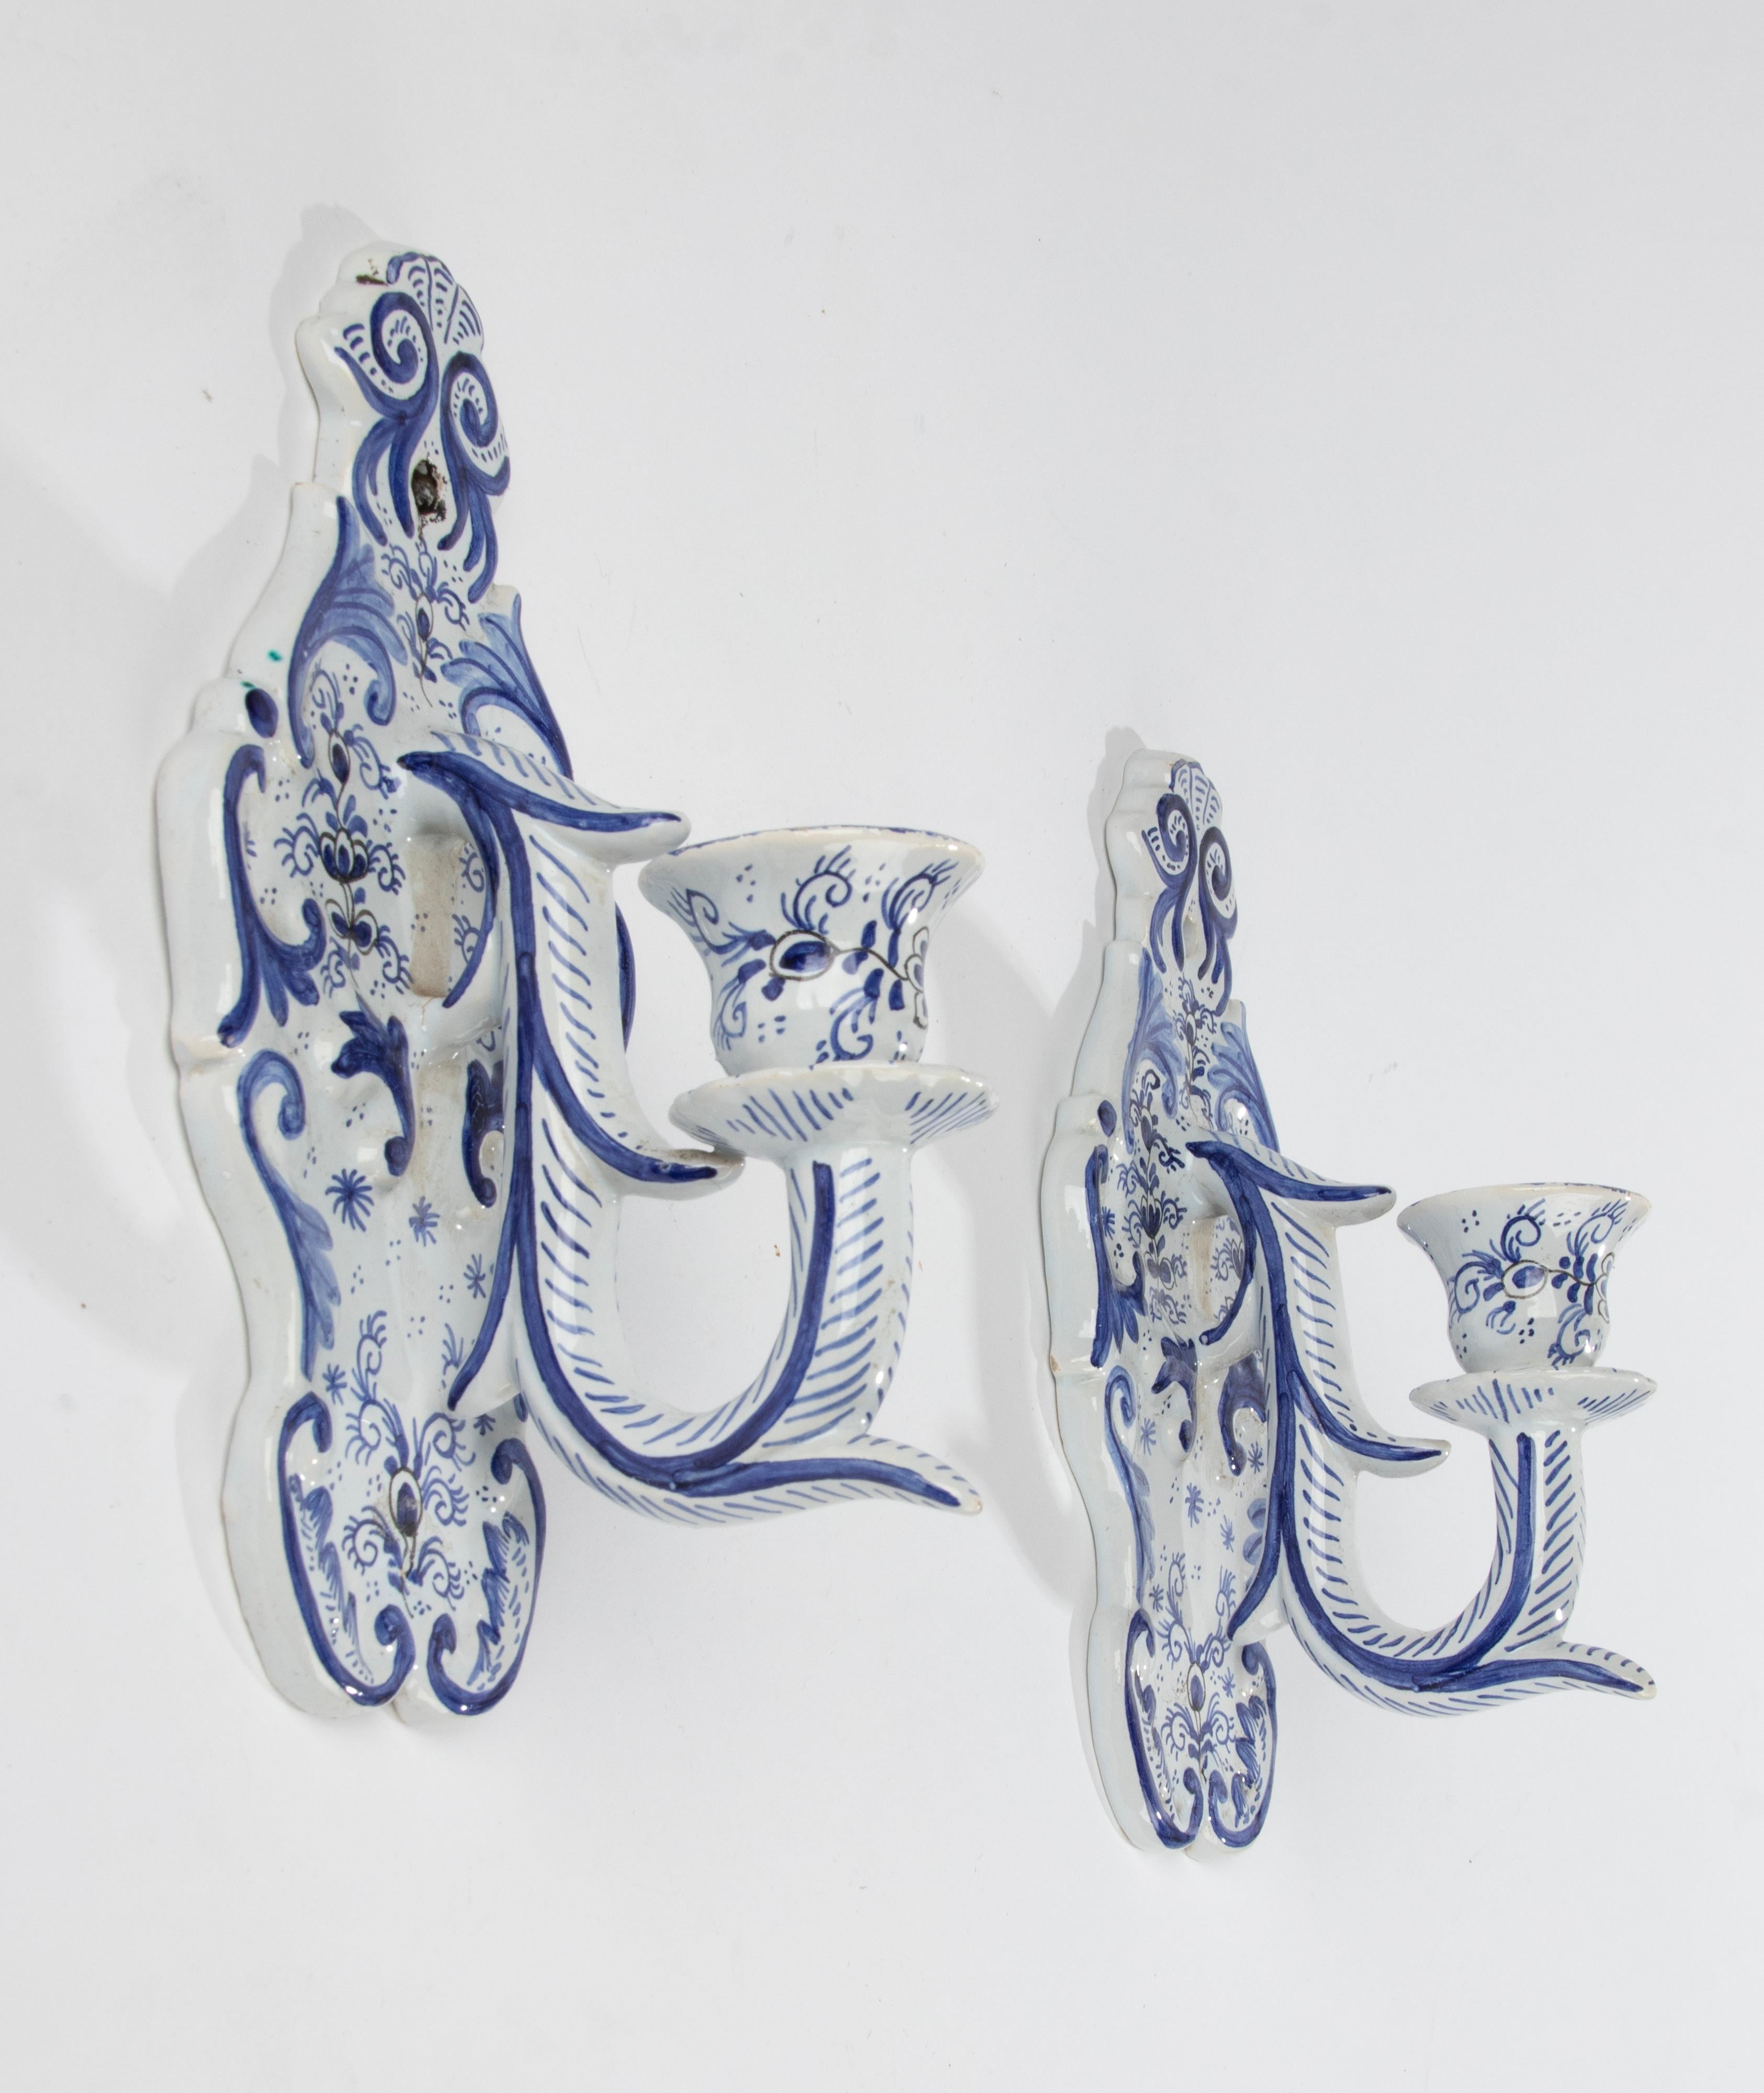 A pair of decorative Delft candlesticks, made of earthenware, hand painted with a blue and white pattern.
The candlesticks can also be made electrically and have small holes for wire to pass through. But they are also charming as wall holders for